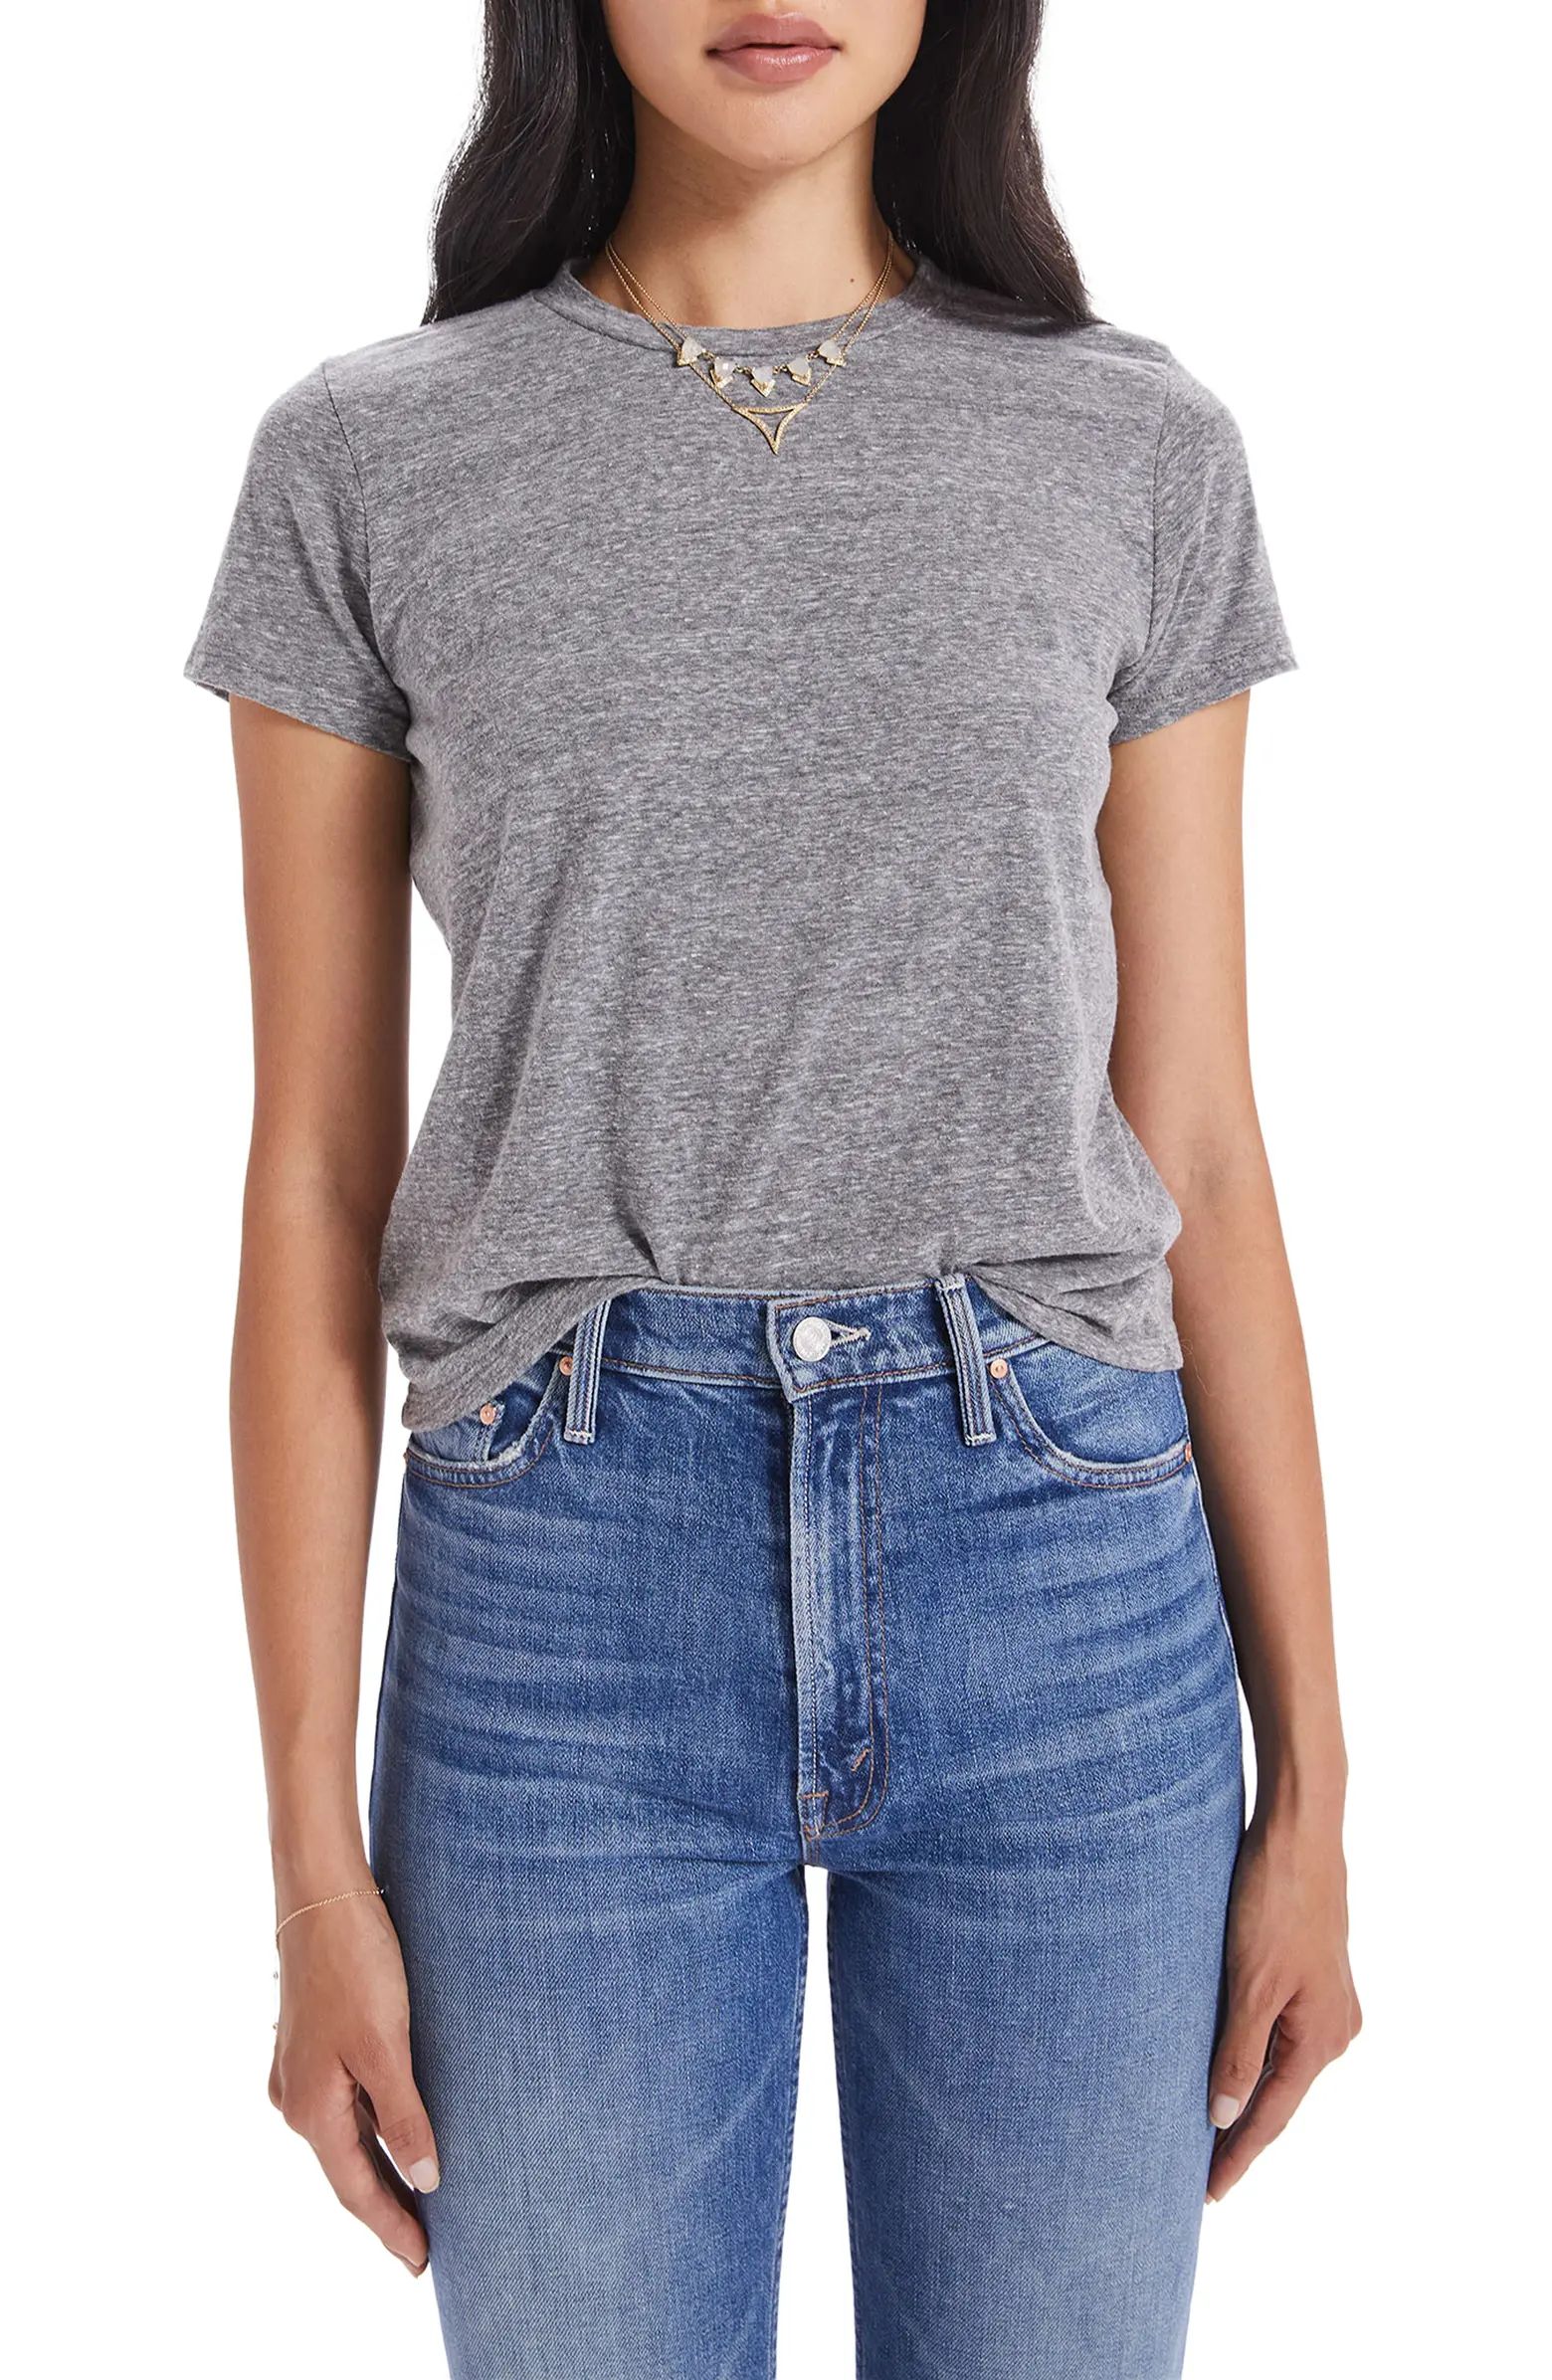 The Lil Goodie Goodie T-Shirt | Nordstrom